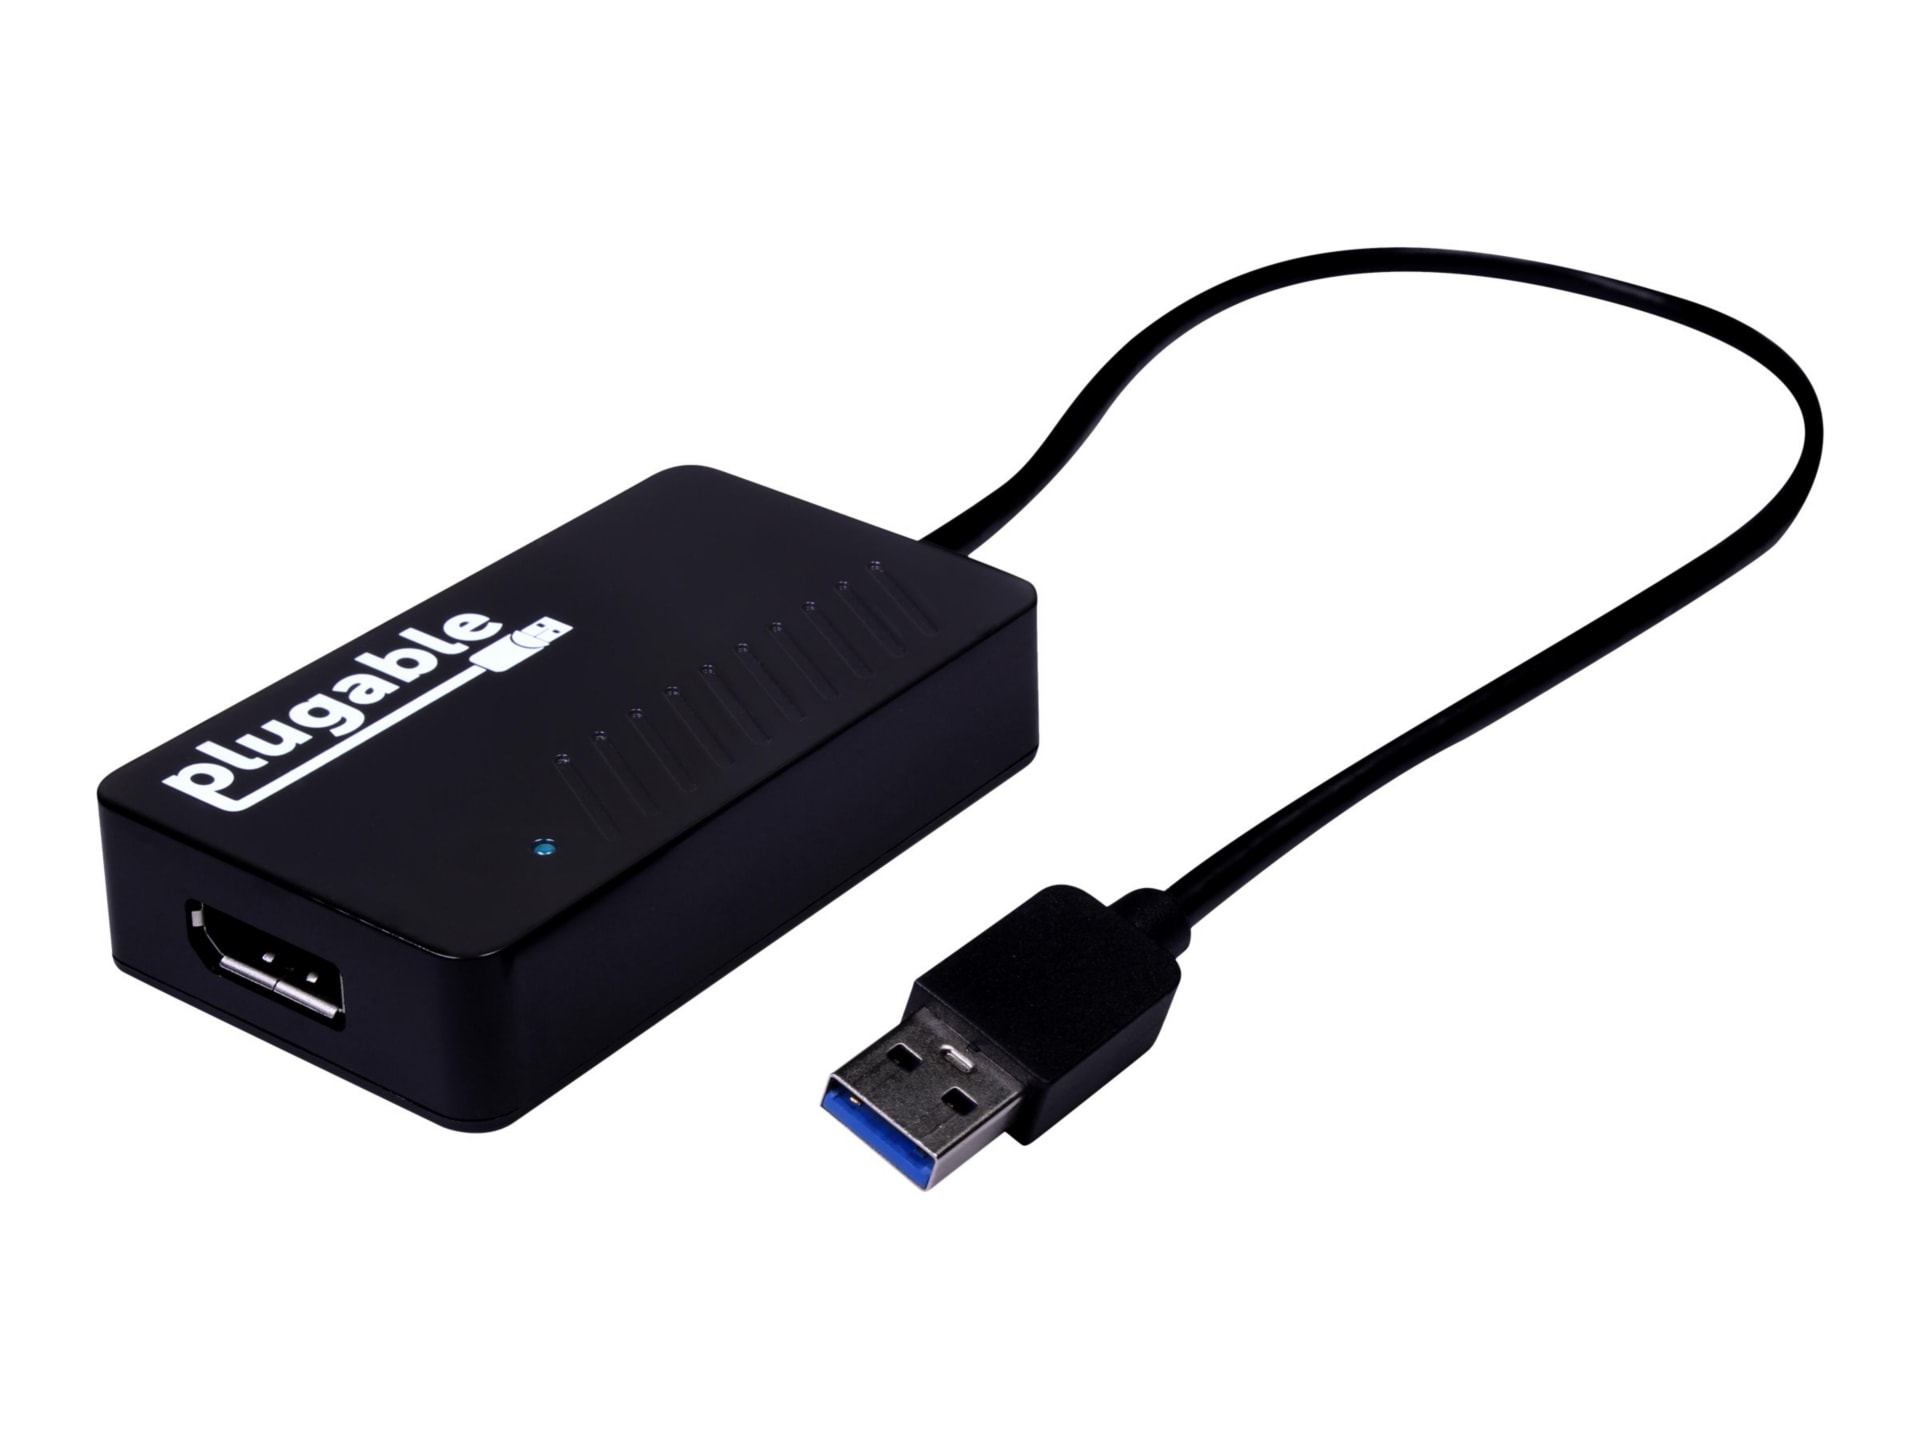 Plugable USB 3.0 to DisplayPort 4K UHD Video Graphics Adapter for Multiple Monitors up to 3840x2160,Windows 10,8.1,7